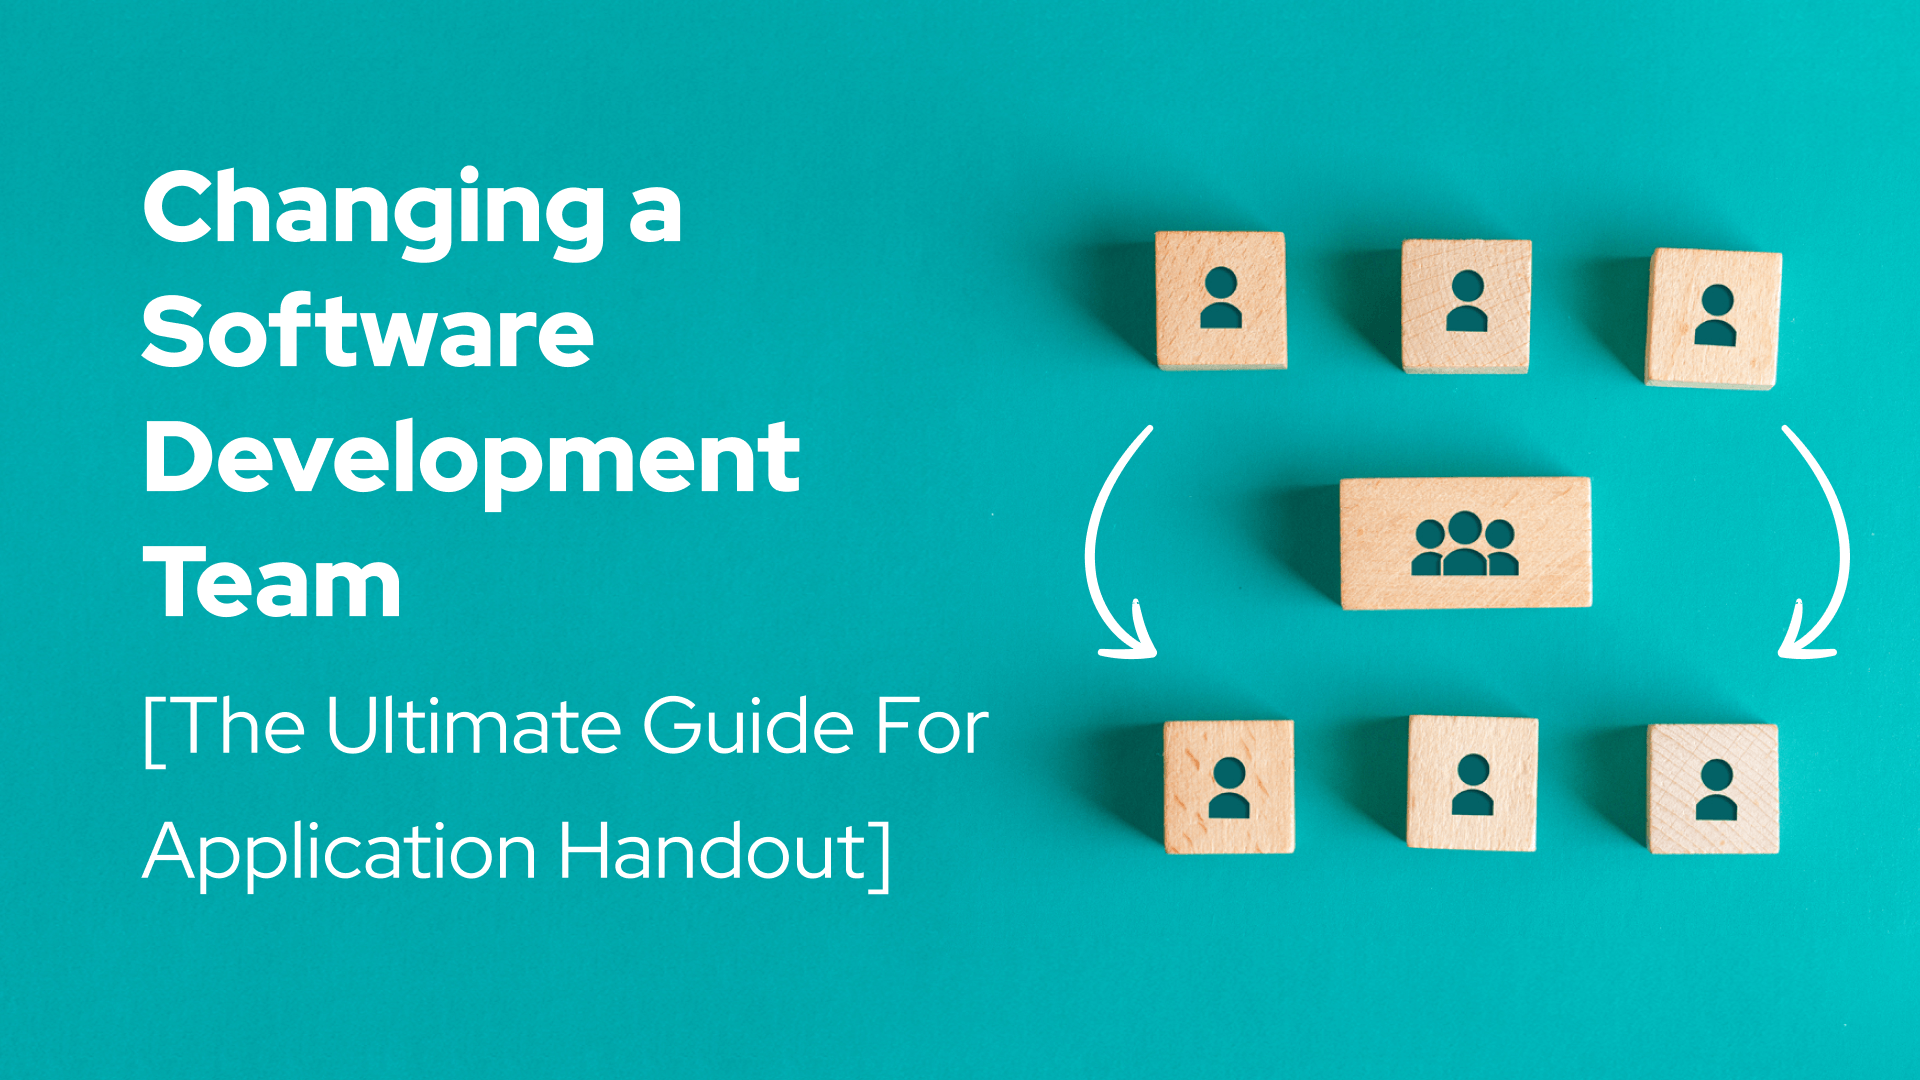 Changing a Software Development Team The Ultimate Guide For Application Handout